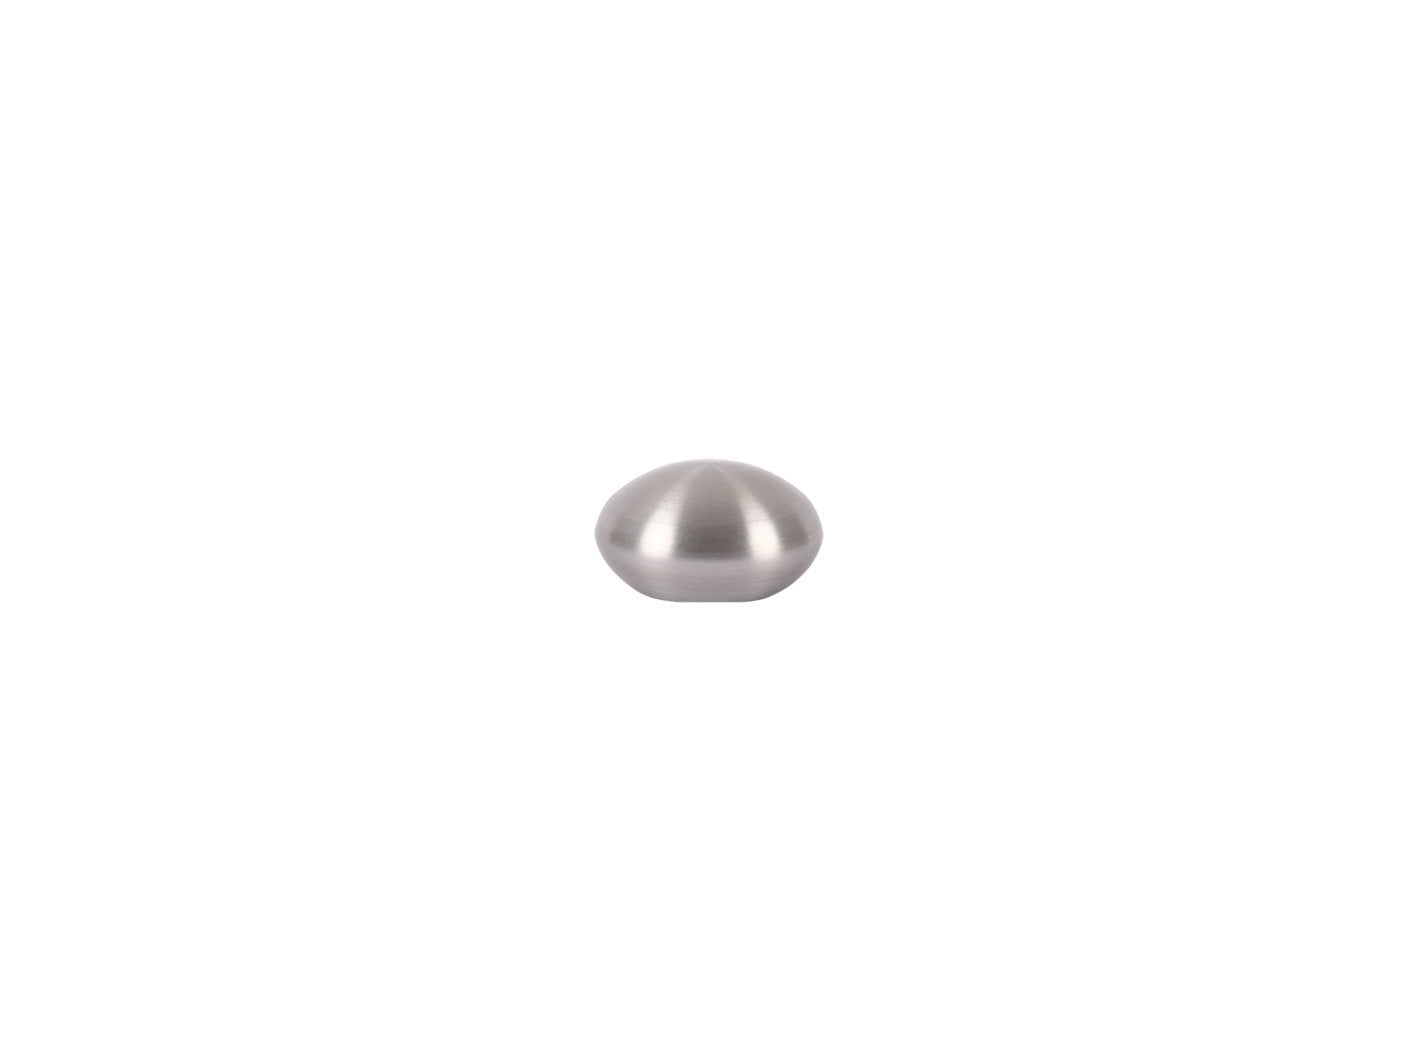 Elliptical Finial in stainless steel for 19mm curtain pole end